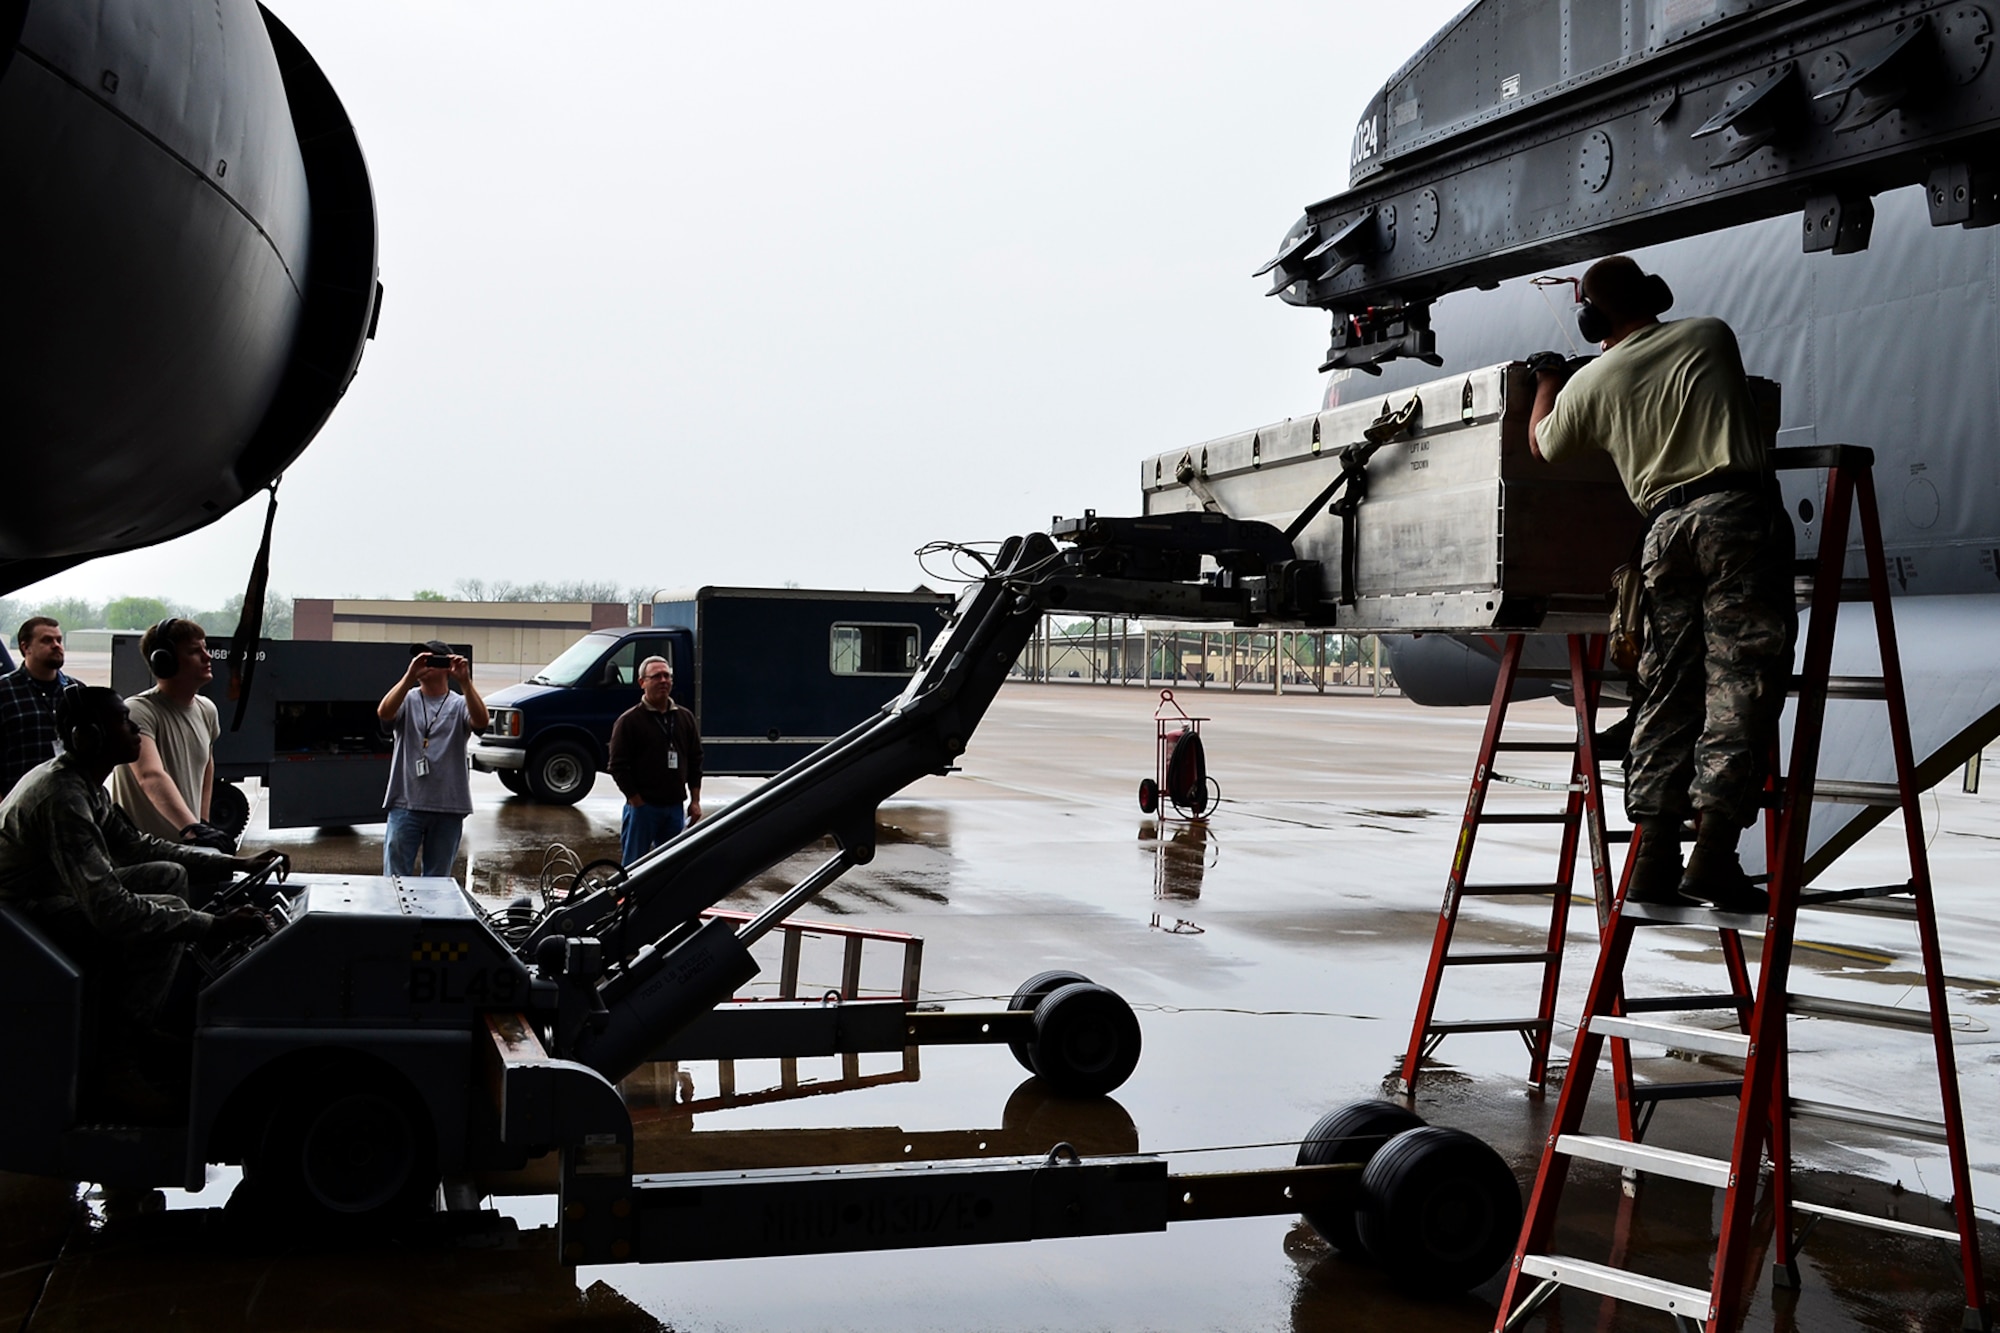 A casket containing the AN/ASQ-236 Radar Pod is lifted to a mounting station on a 93rd Bomb Squadron B-52H Stratofortress, April 14, 2014, Barksdale Air Force Base, Louisiana. This marks the first test of the pod on a B-52, which will give the aircraft the ability to precisely geo-locate points of interest and conduct surveillance activities day or night, in adverse weather conditions. (U.S. Air Force photo by Master Sgt. John Paxton/Released)